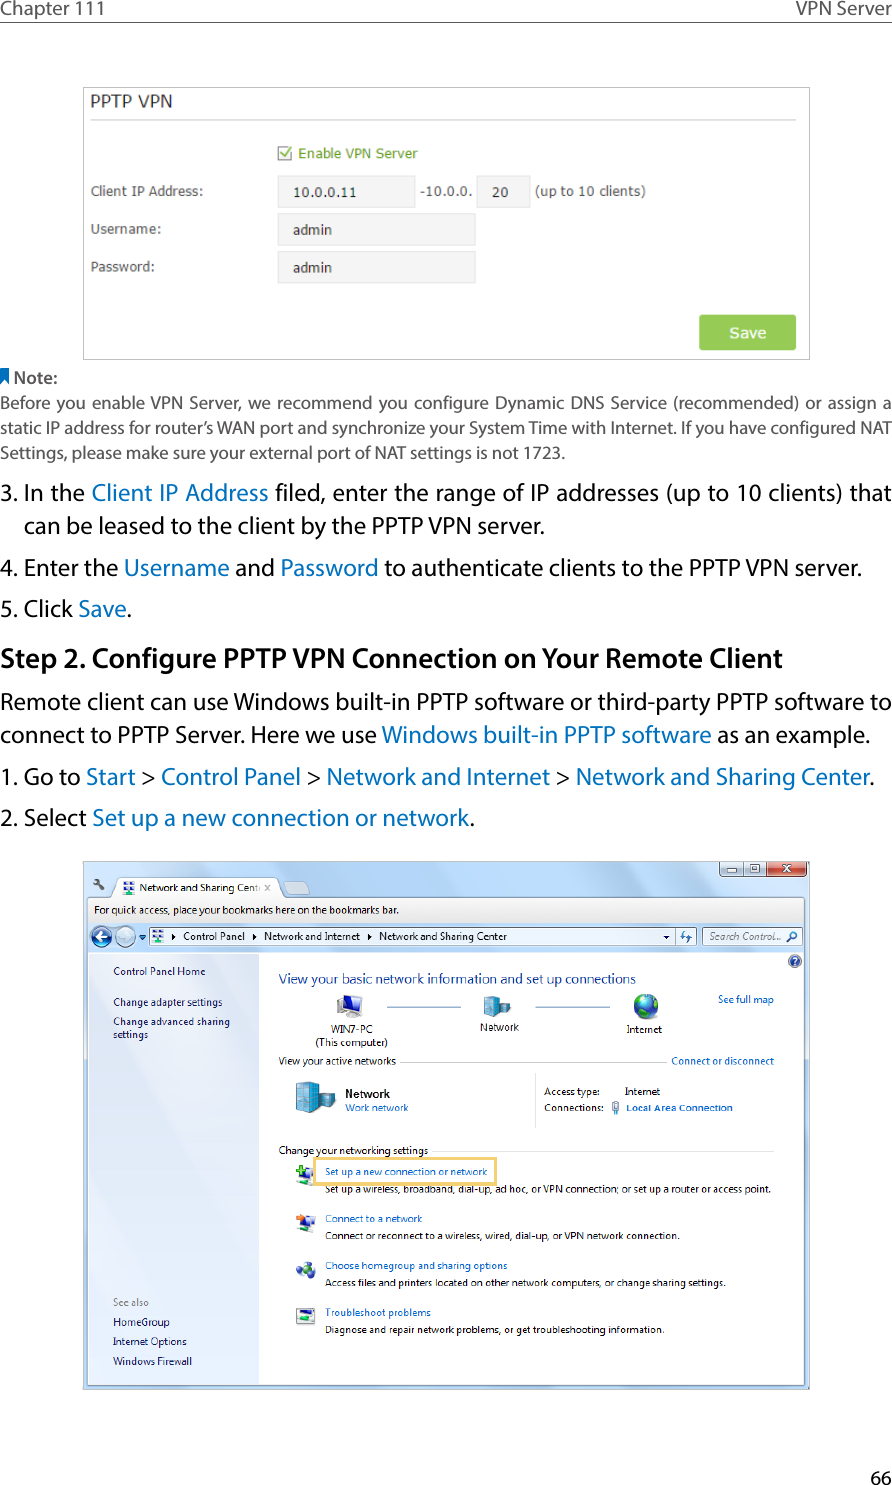 66Chapter 111 VPN ServerNote:Before you enable VPN Server, we recommend you configure Dynamic DNS Service (recommended) or assign a static IP address for router’s WAN port and synchronize your System Time with Internet. If you have configured NAT Settings, please make sure your external port of NAT settings is not 1723.3. In the Client IP Address filed, enter the range of IP addresses (up to 10 clients) that can be leased to the client by the PPTP VPN server.4. Enter the Username and Password to authenticate clients to the PPTP VPN server.5. Click Save.Step 2. Configure PPTP VPN Connection on Your Remote ClientRemote client can use Windows built-in PPTP software or third-party PPTP software to connect to PPTP Server. Here we use Windows built-in PPTP software as an example.1. Go to Start &gt; Control Panel &gt; Network and Internet &gt; Network and Sharing Center.2. Select Set up a new connection or network.